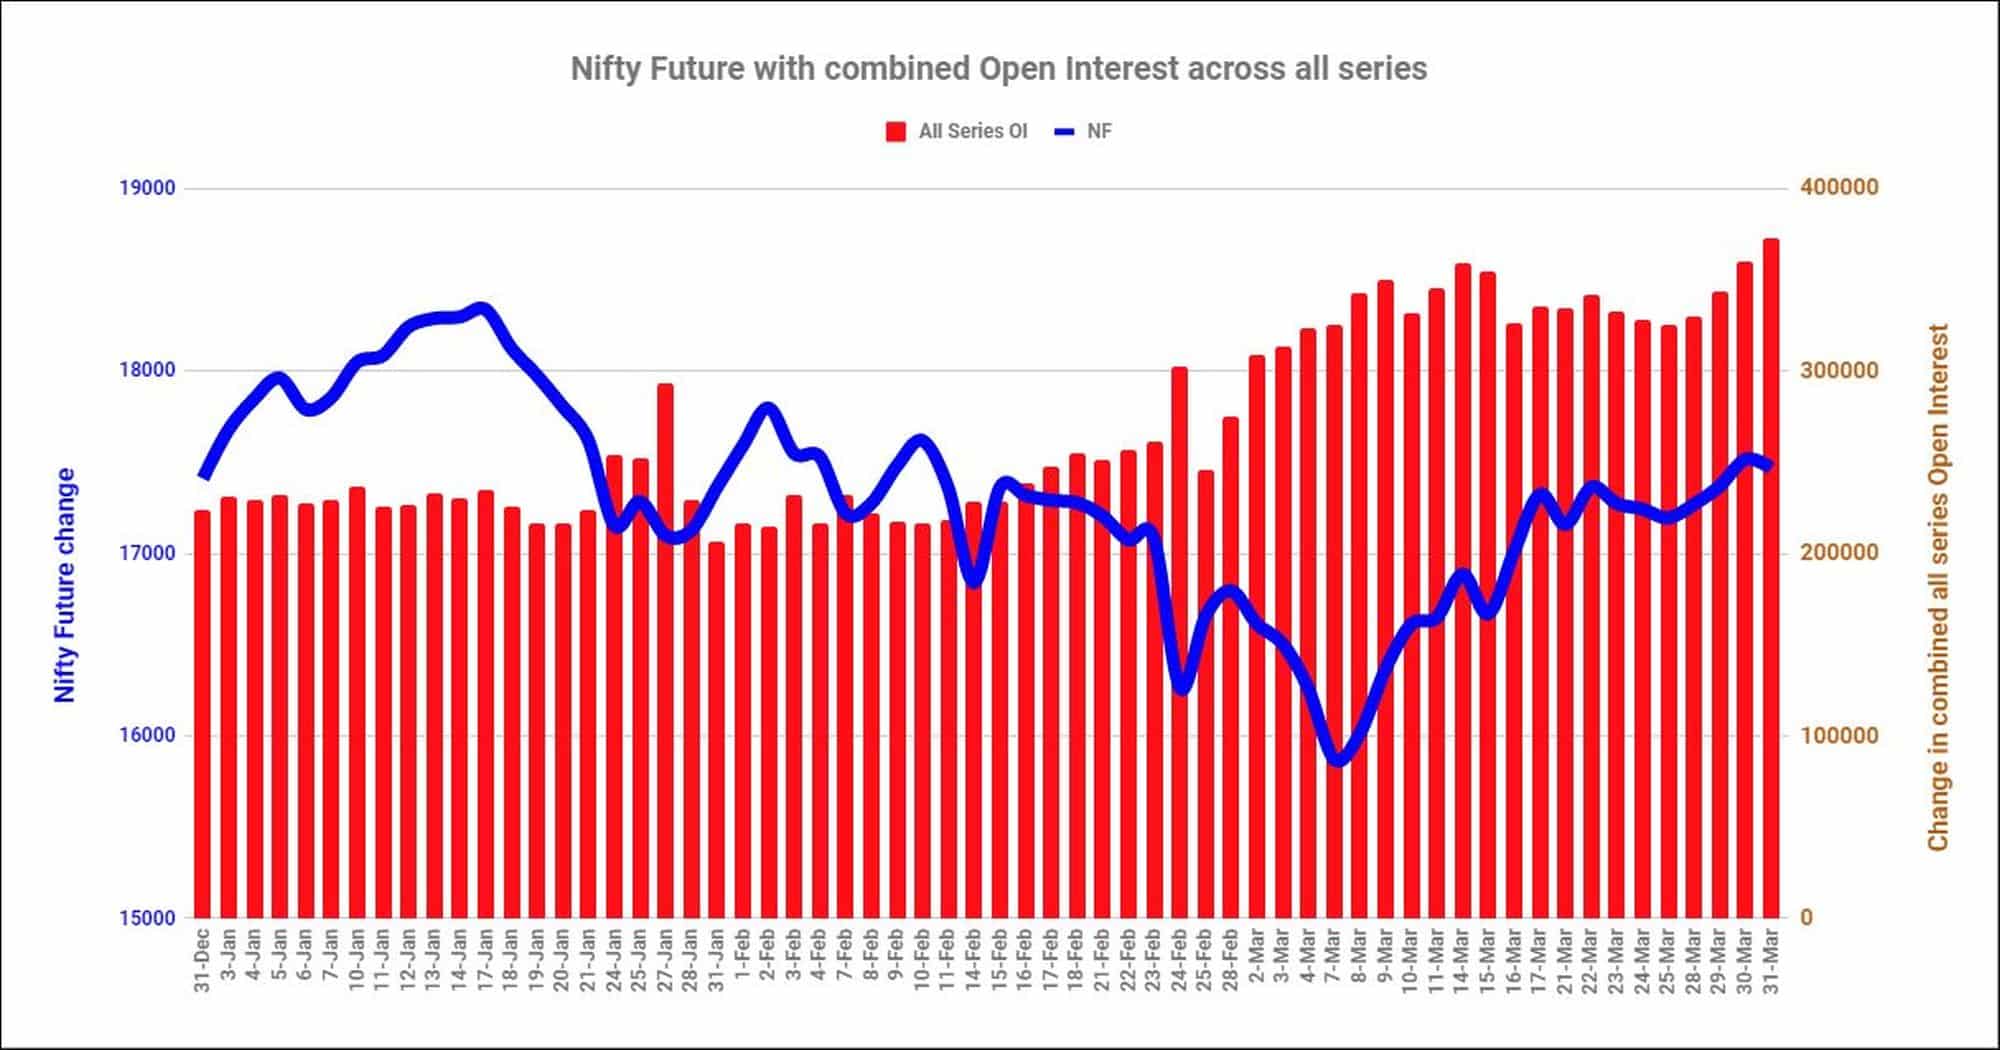 Nf31Mar Nifty And Banknifty Futures With All Series Combined Open Interest – 31St Mar 2022 Banknifty, Futures, Nifty, Open Interest